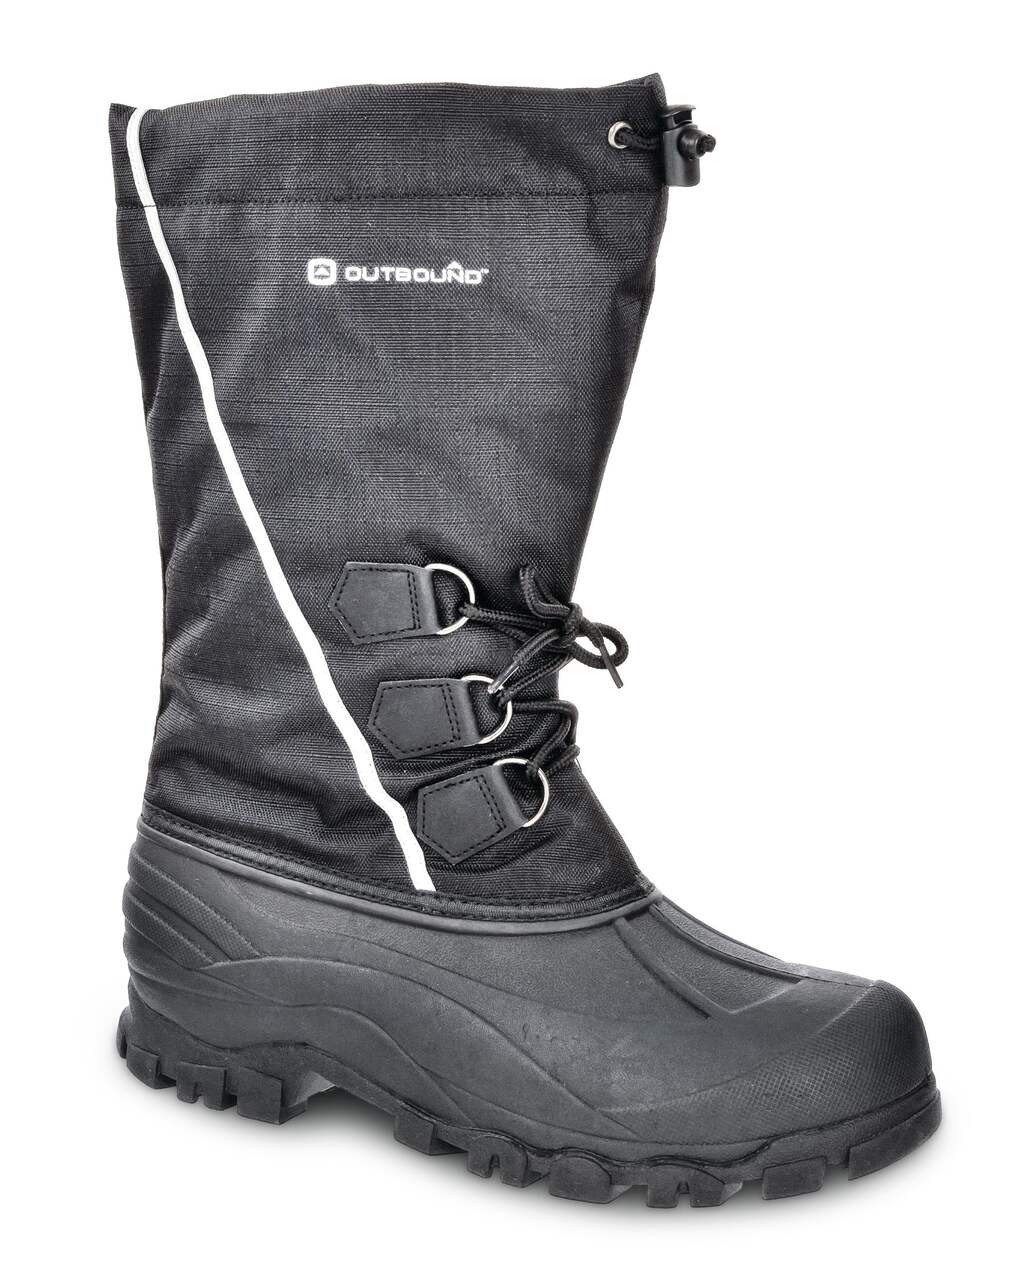 https://media-www.canadiantire.ca/product/playing/footwear-apparel/winter-footwear-apparel/1870907/arctic-boot-m7-58a46780-13d9-4a0e-81f3-77fa66ec917c-jpgrendition.jpg?imdensity=1&imwidth=1244&impolicy=mZoom